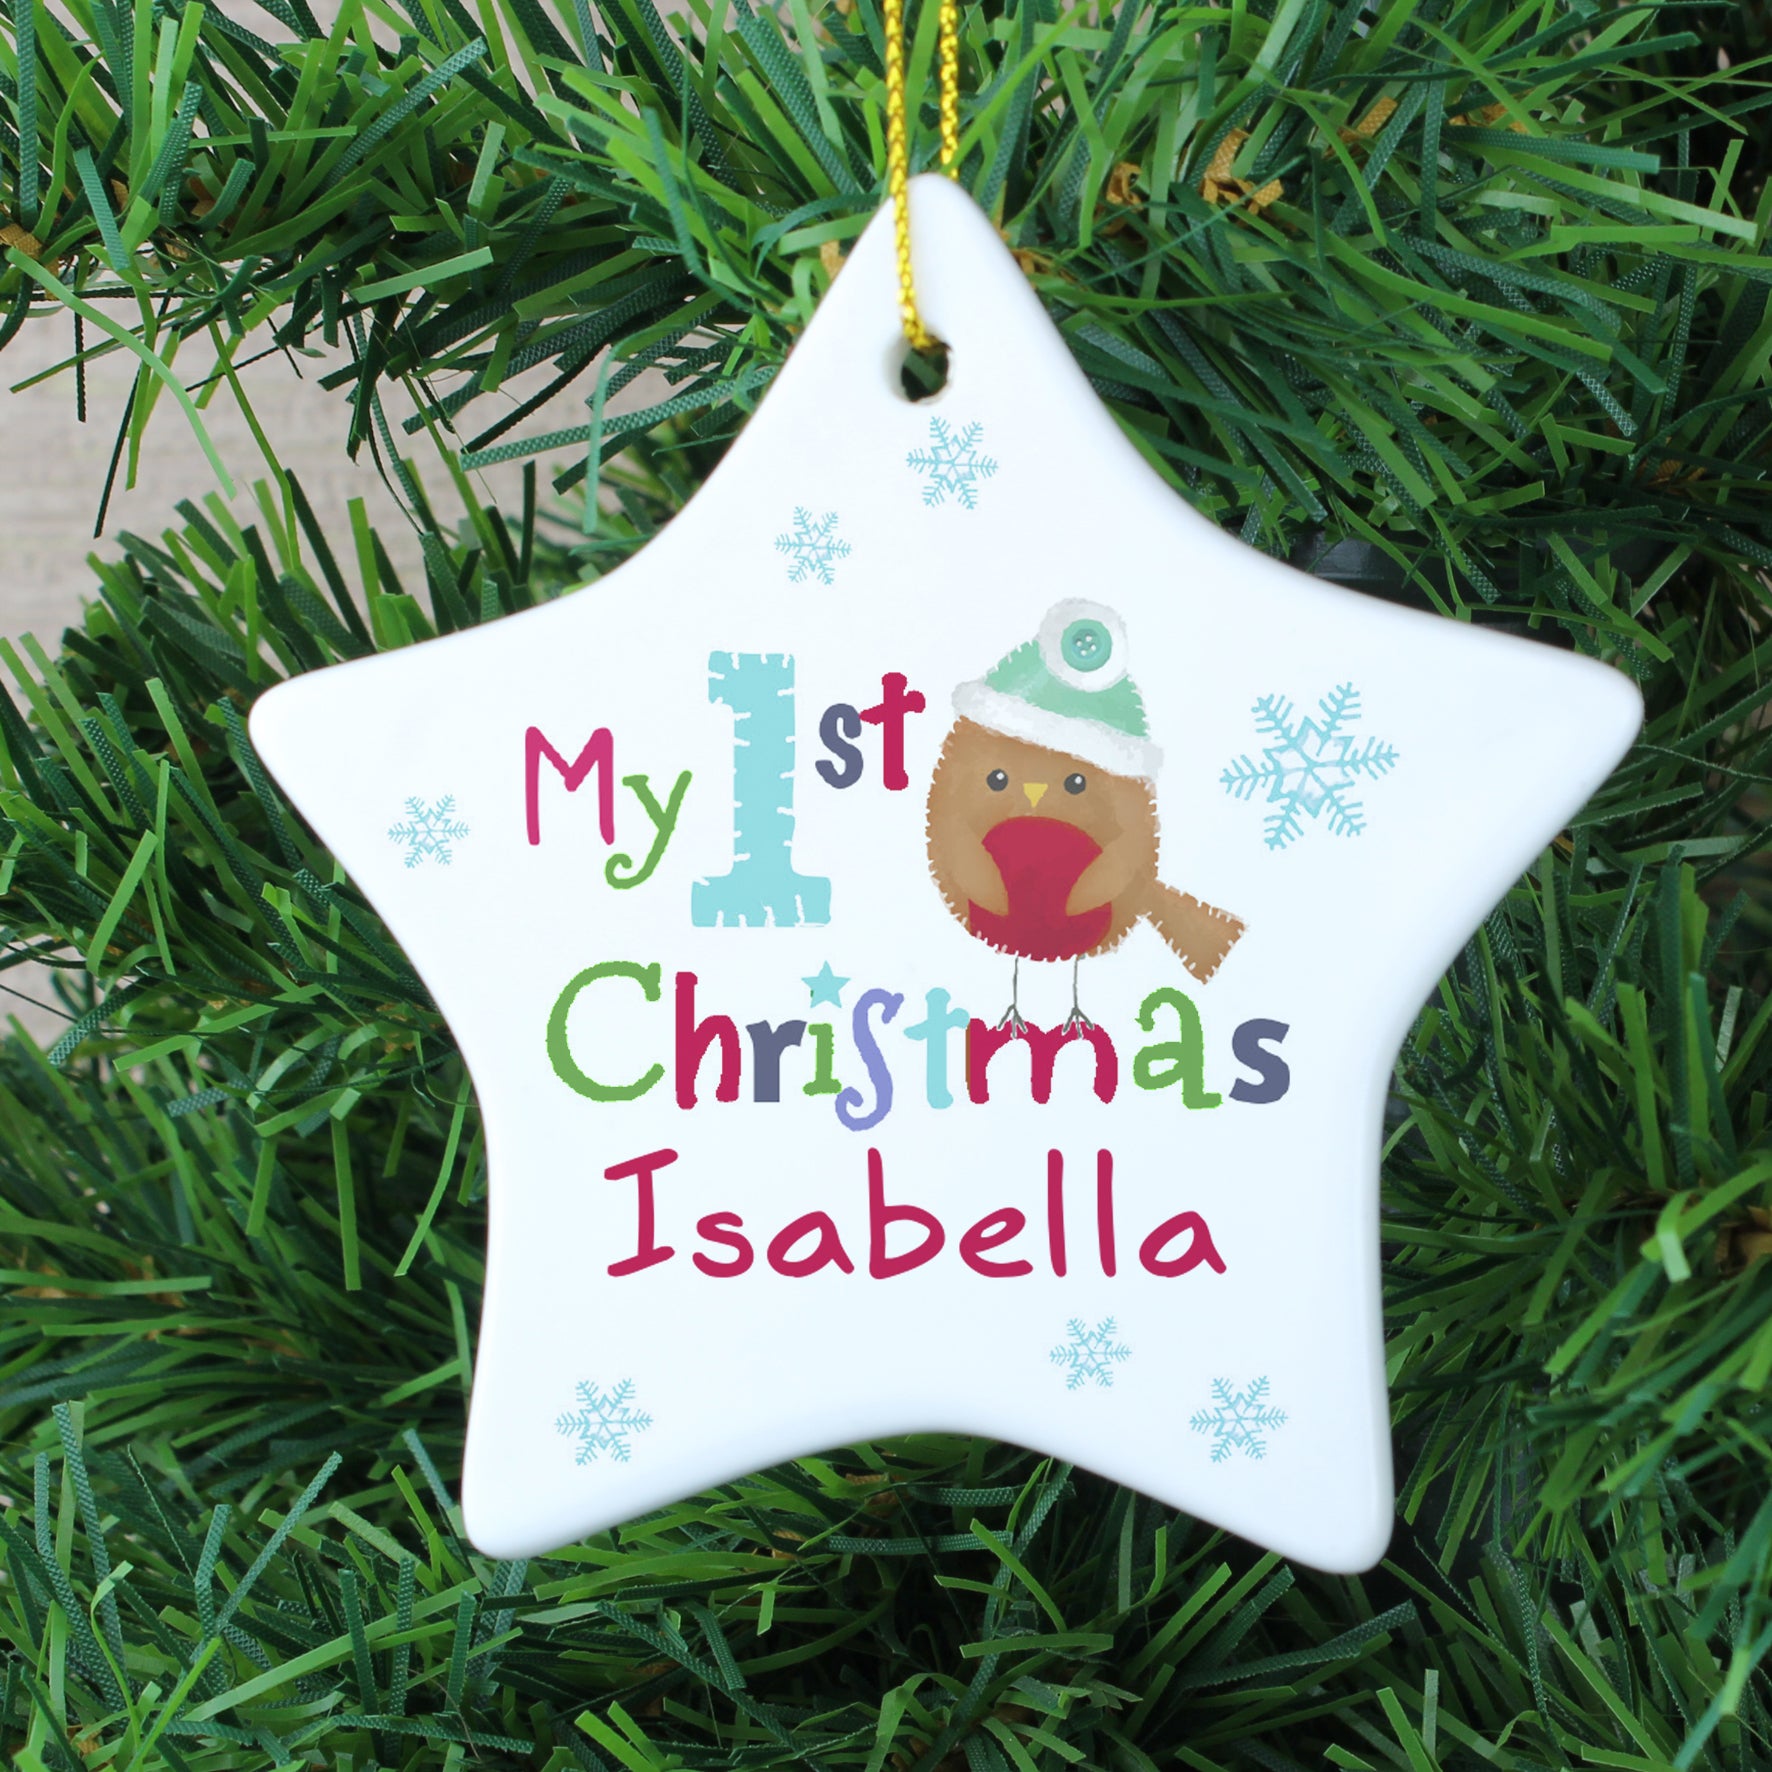 Personalised white ceramic star shaped Christmas decoration to hang on a tree featuring the words 'My 1st Christmas' on the front alongside an image of a hand-drawn robin. The front of the decoration can be personalised with a name of your choice of up to 12 characters.